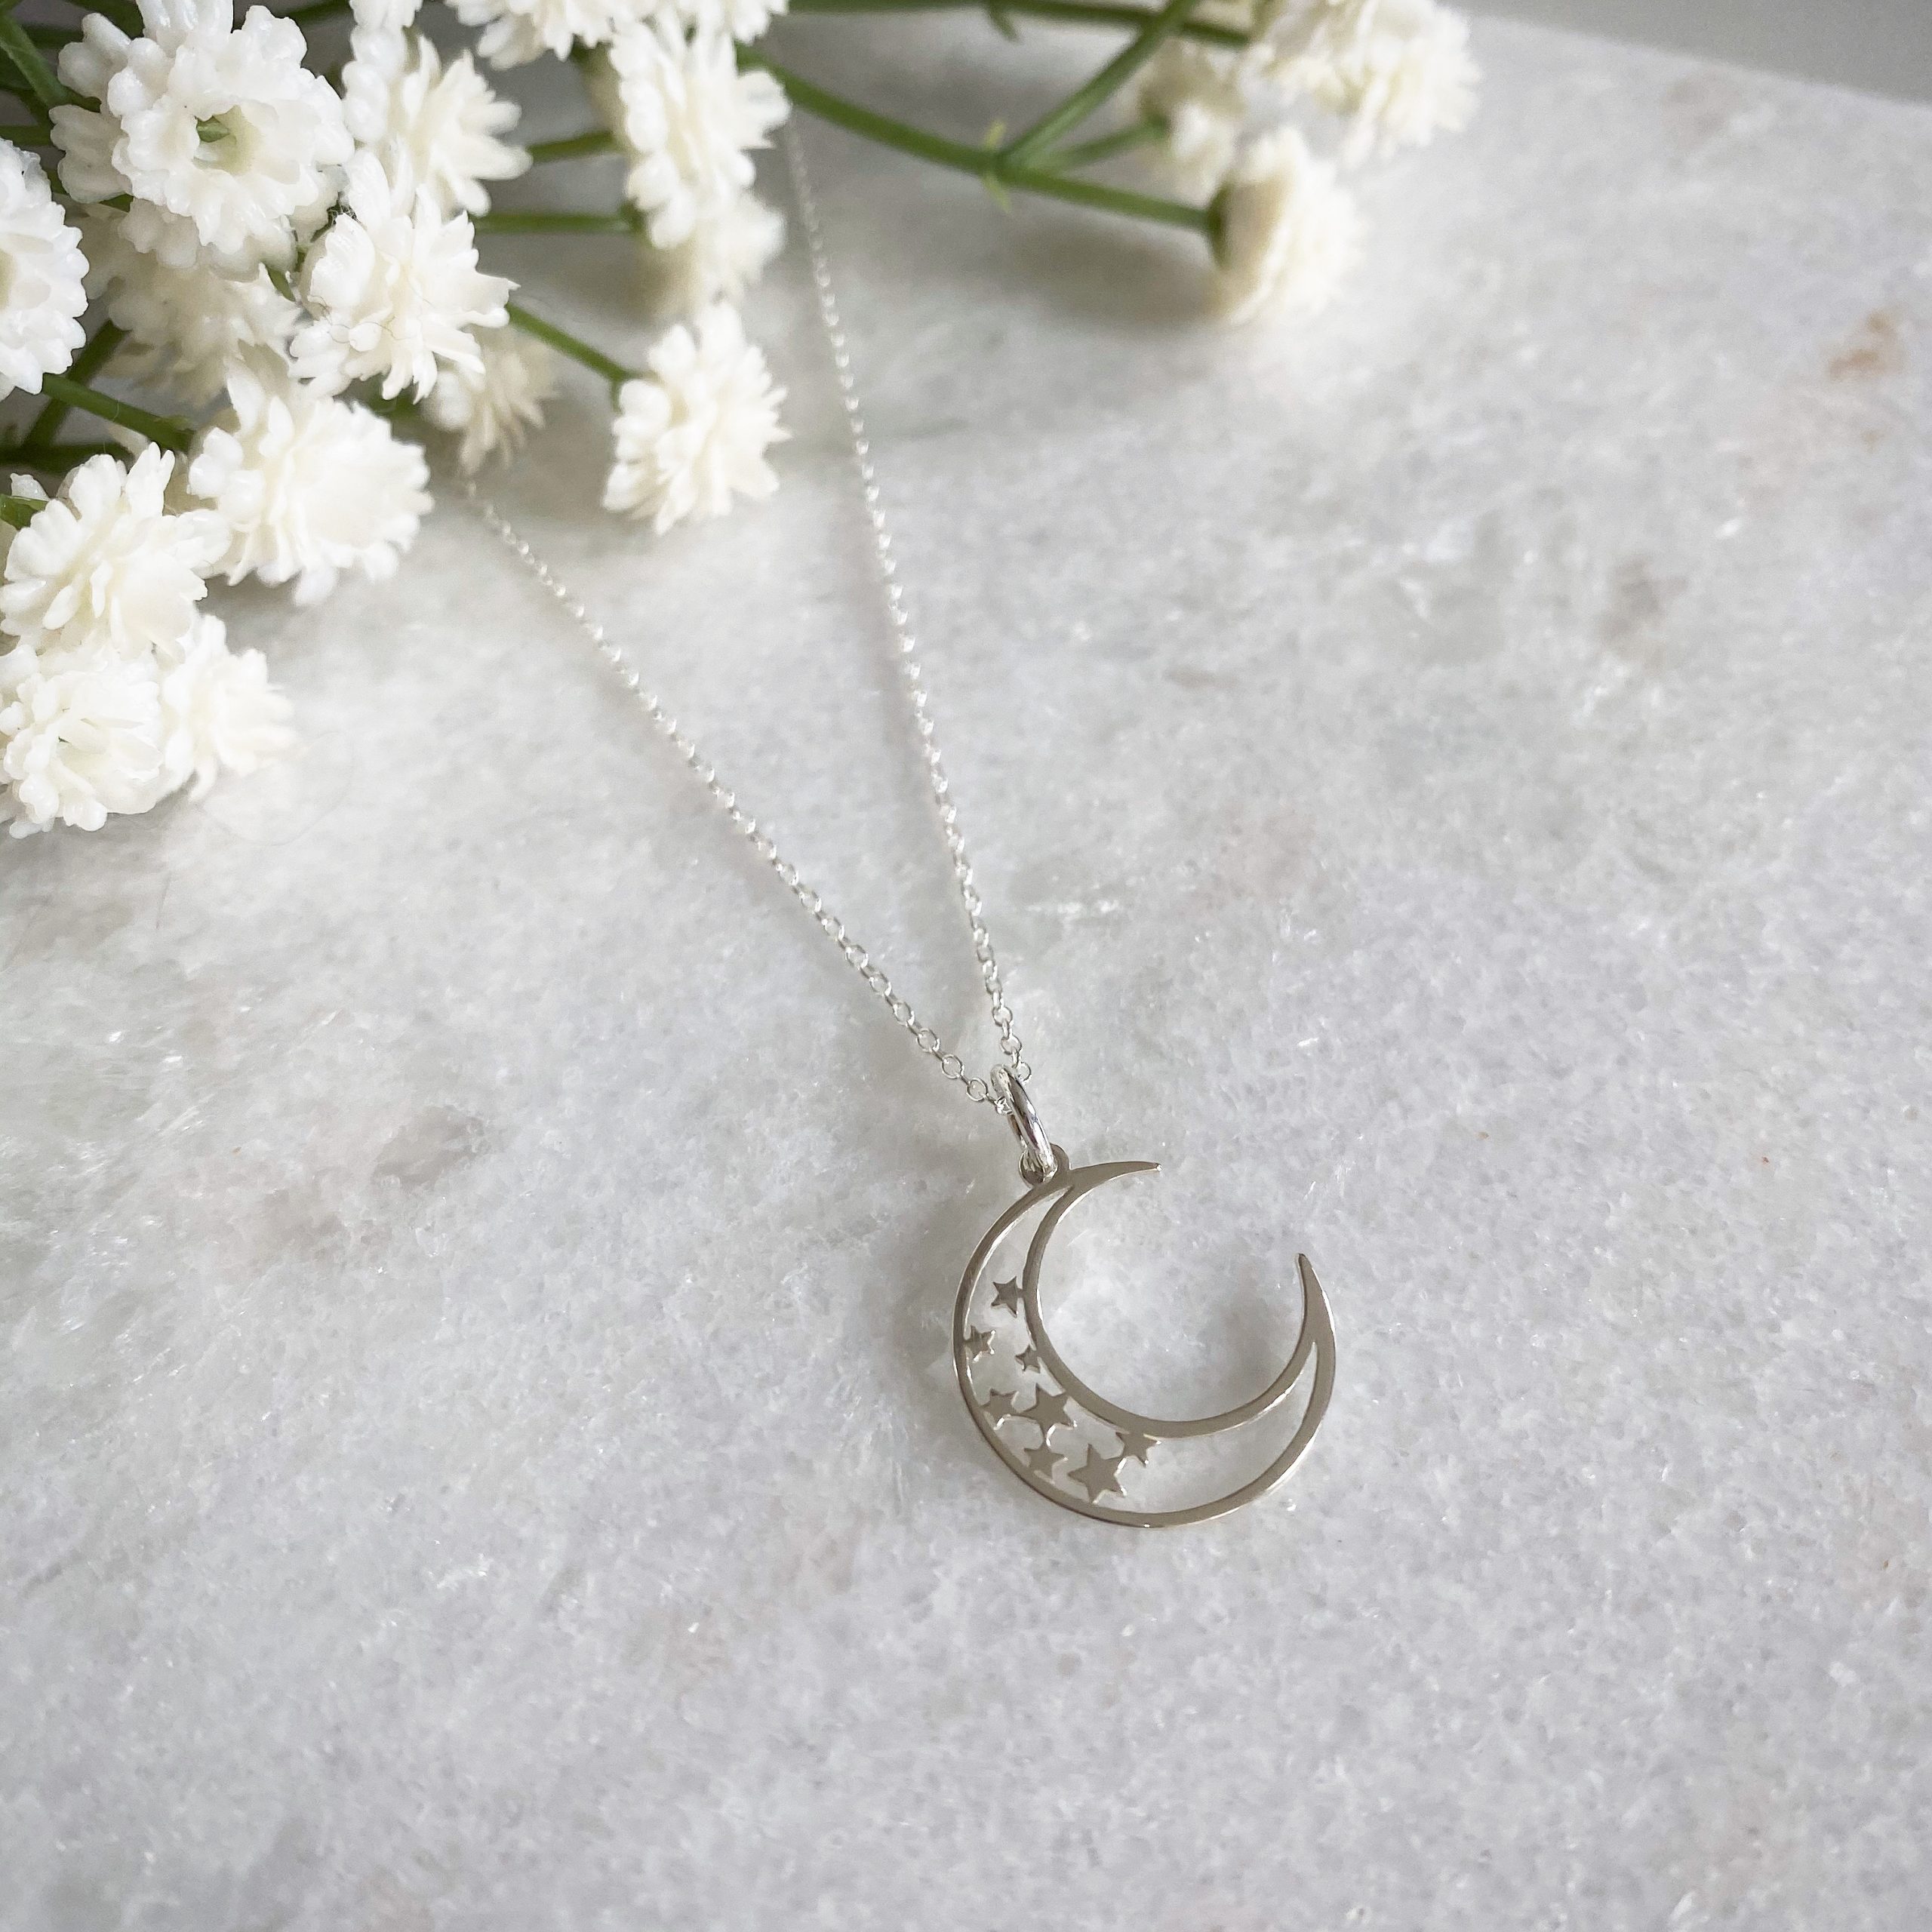 Silver Crescent Moon Necklace | Classy Women Collection